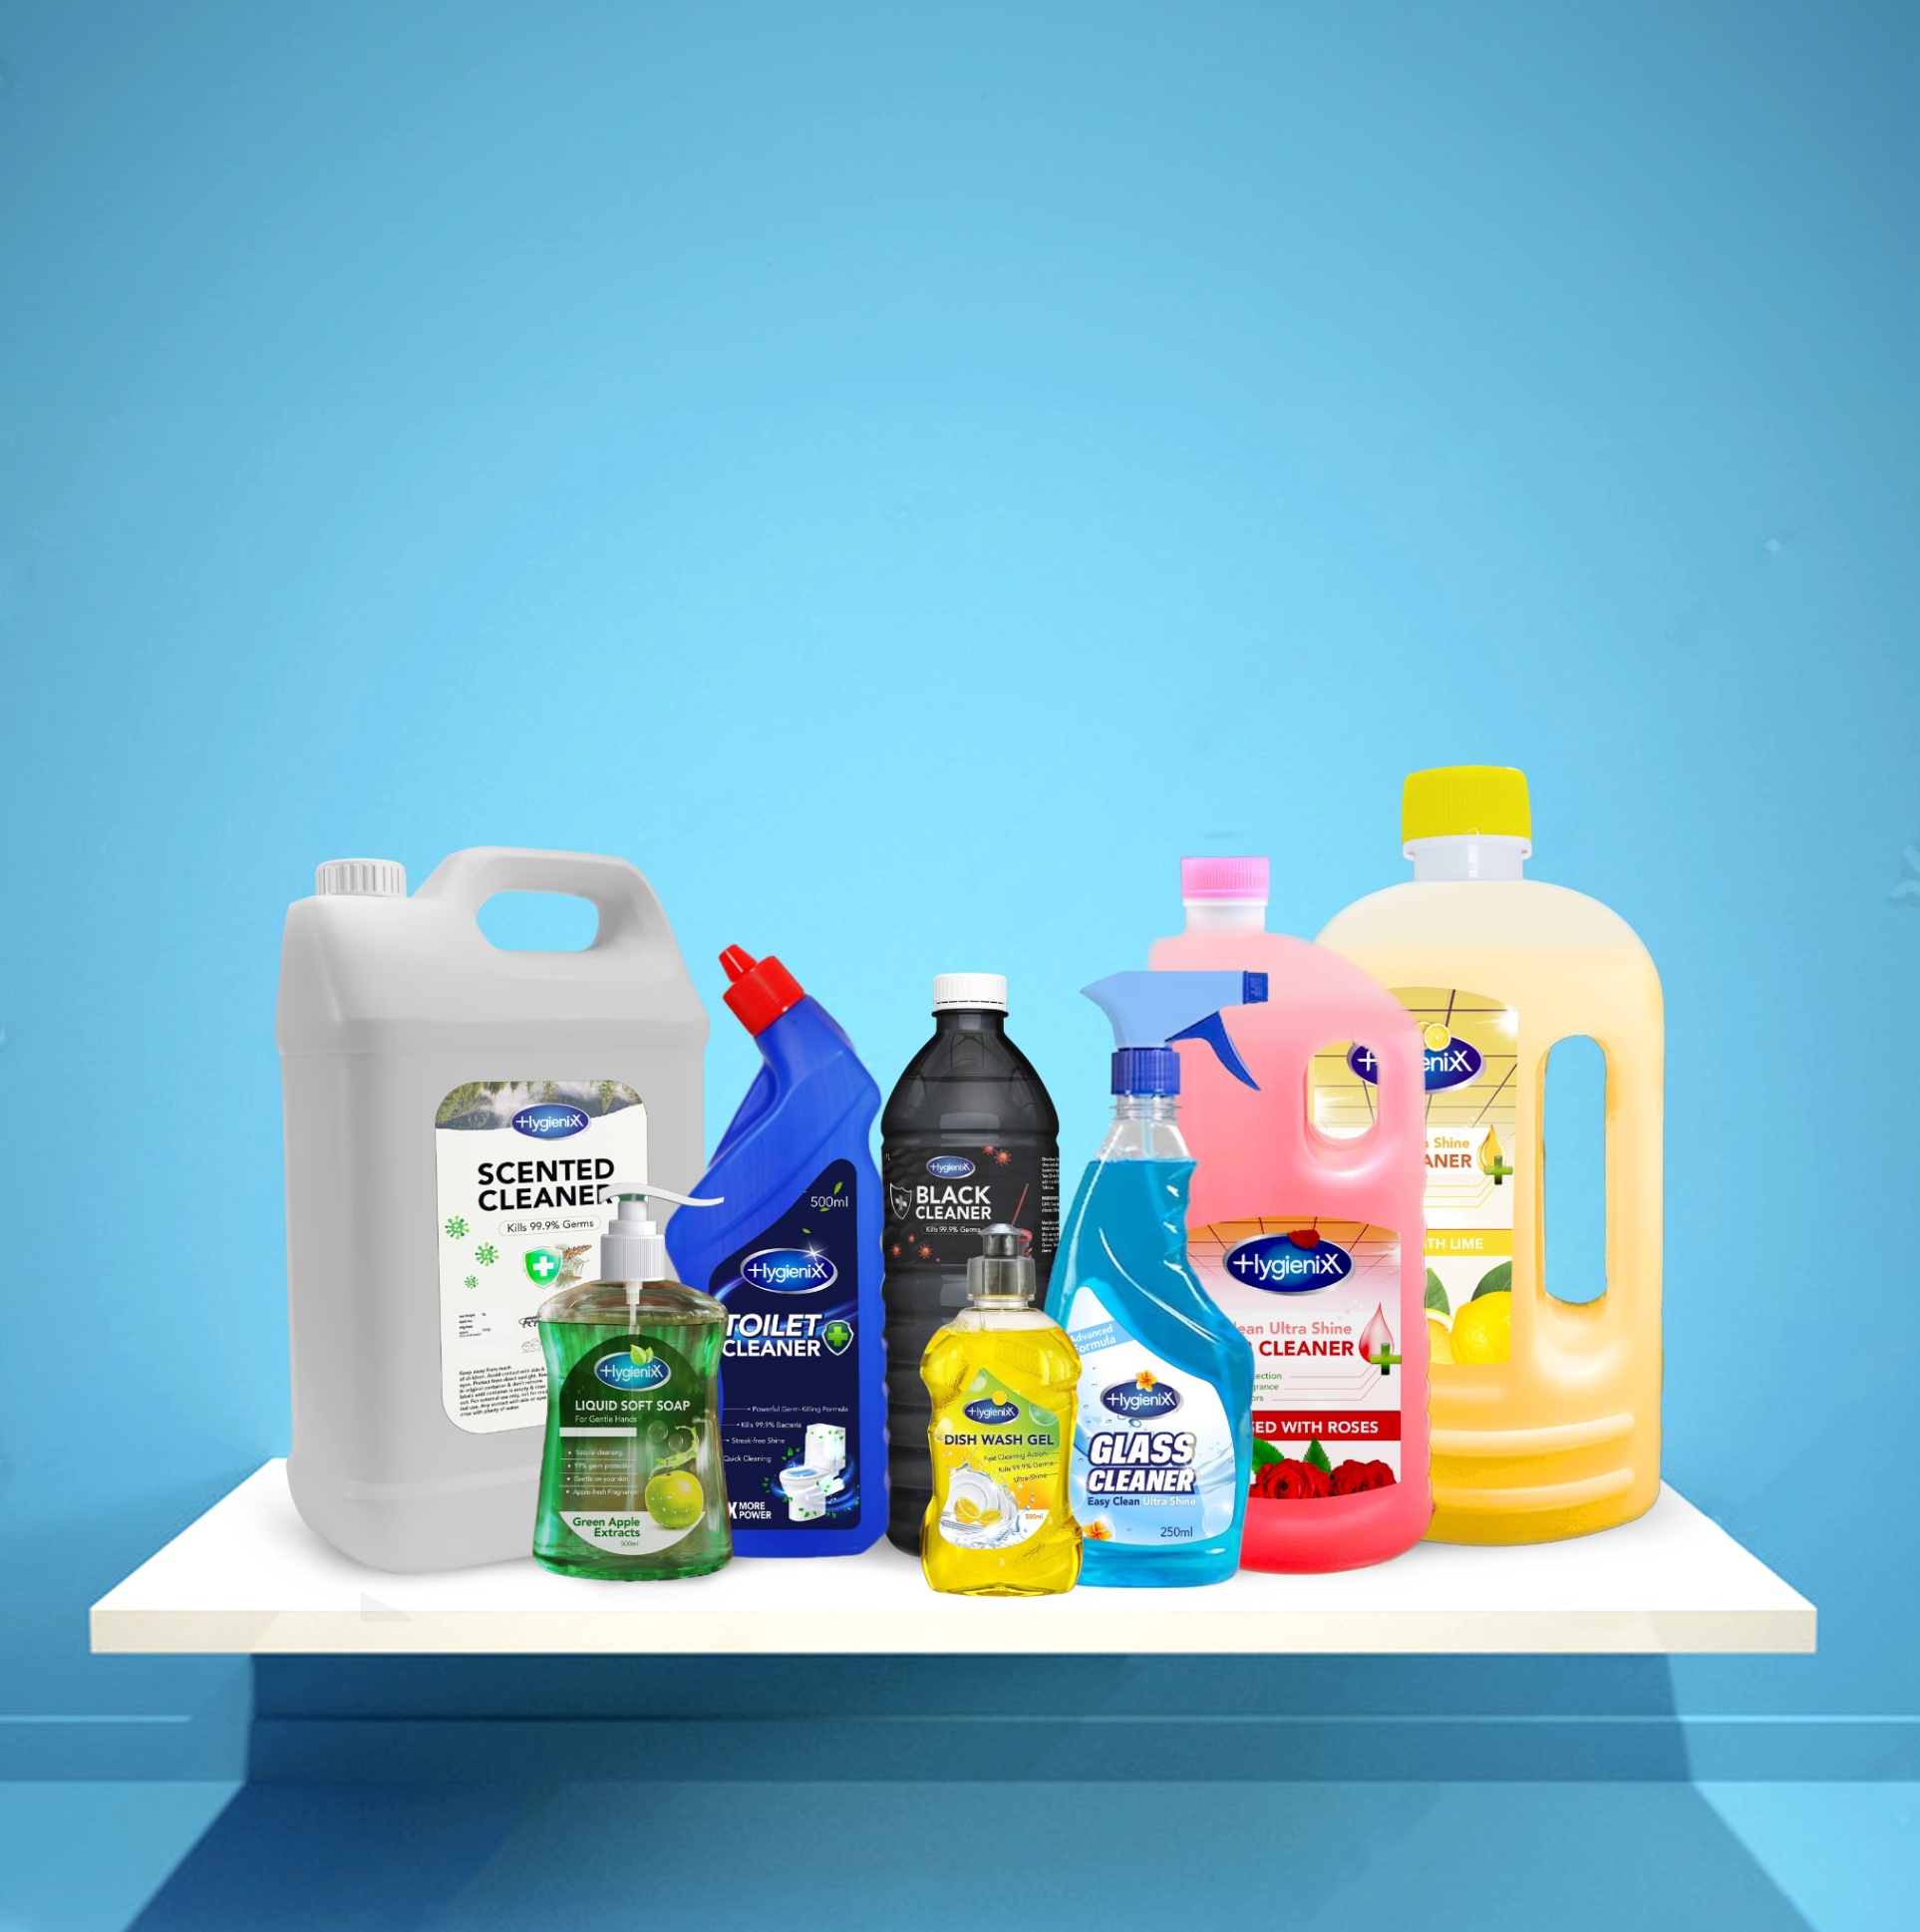 Transform your house into home with premium hygienixx products.